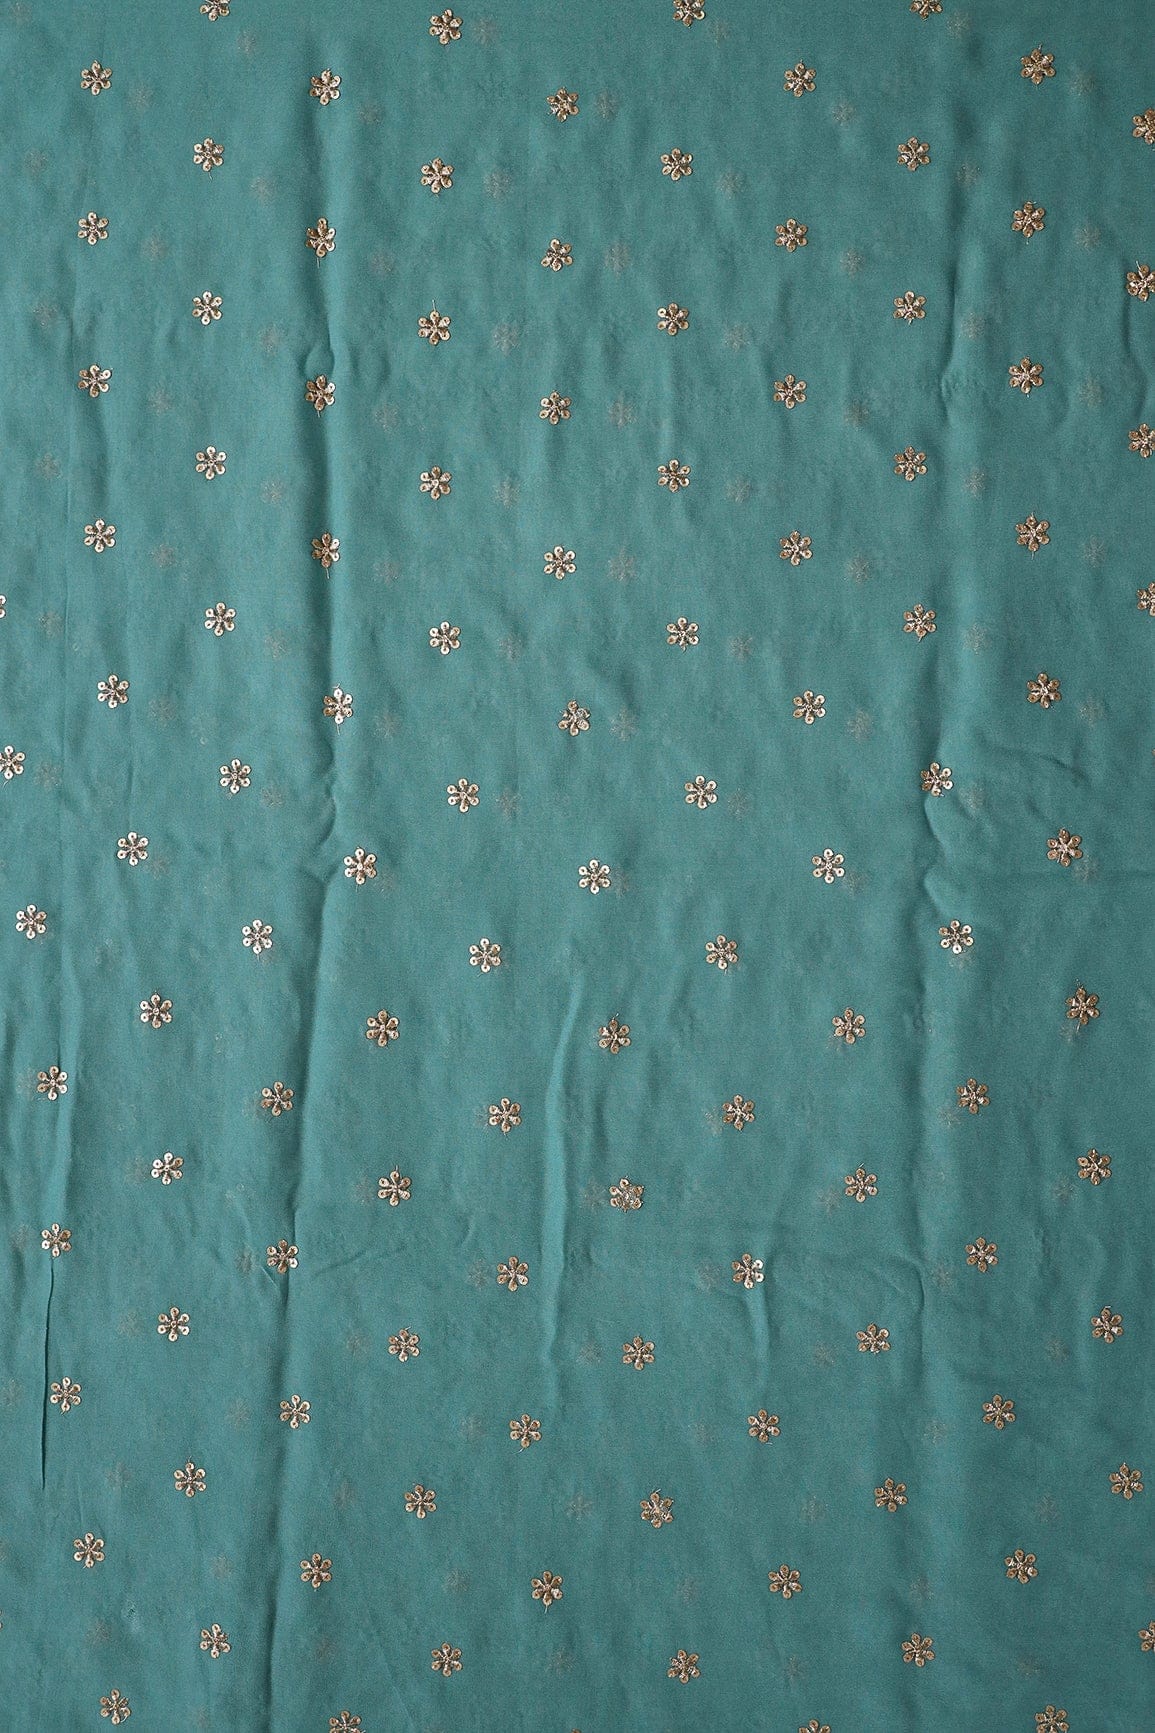 doeraa Embroidery Fabrics Gold Sequins With Gold Zari Beautiful Small Motif Embroidery On Teal Viscose Georgette Fabric